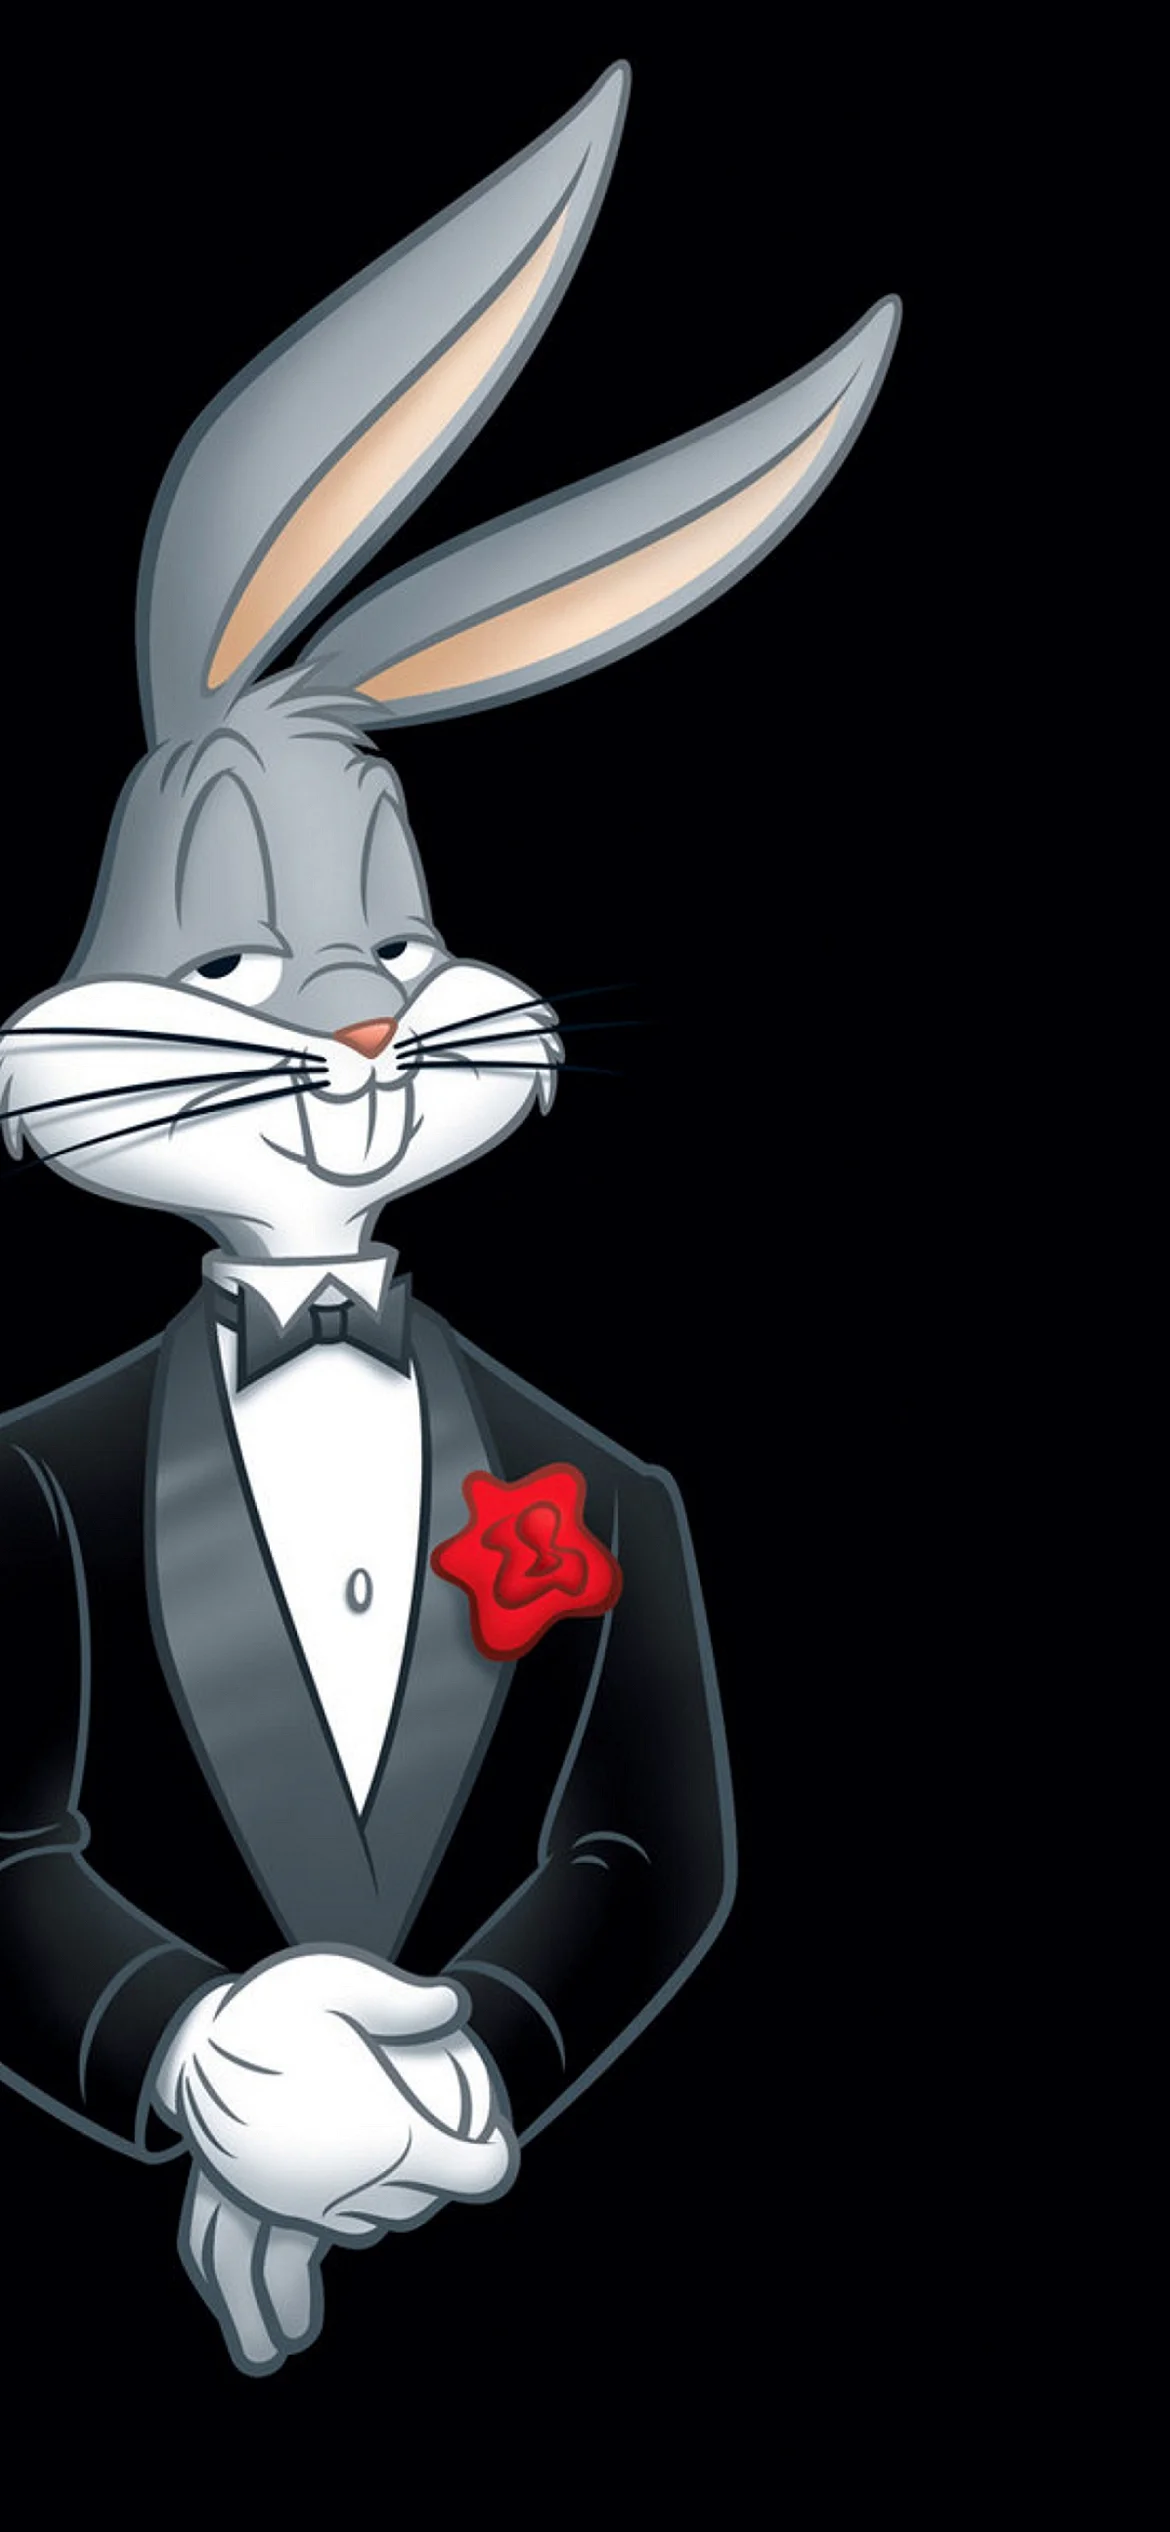 Bugs Bunny Wallpaper for iPhone 13 Pro